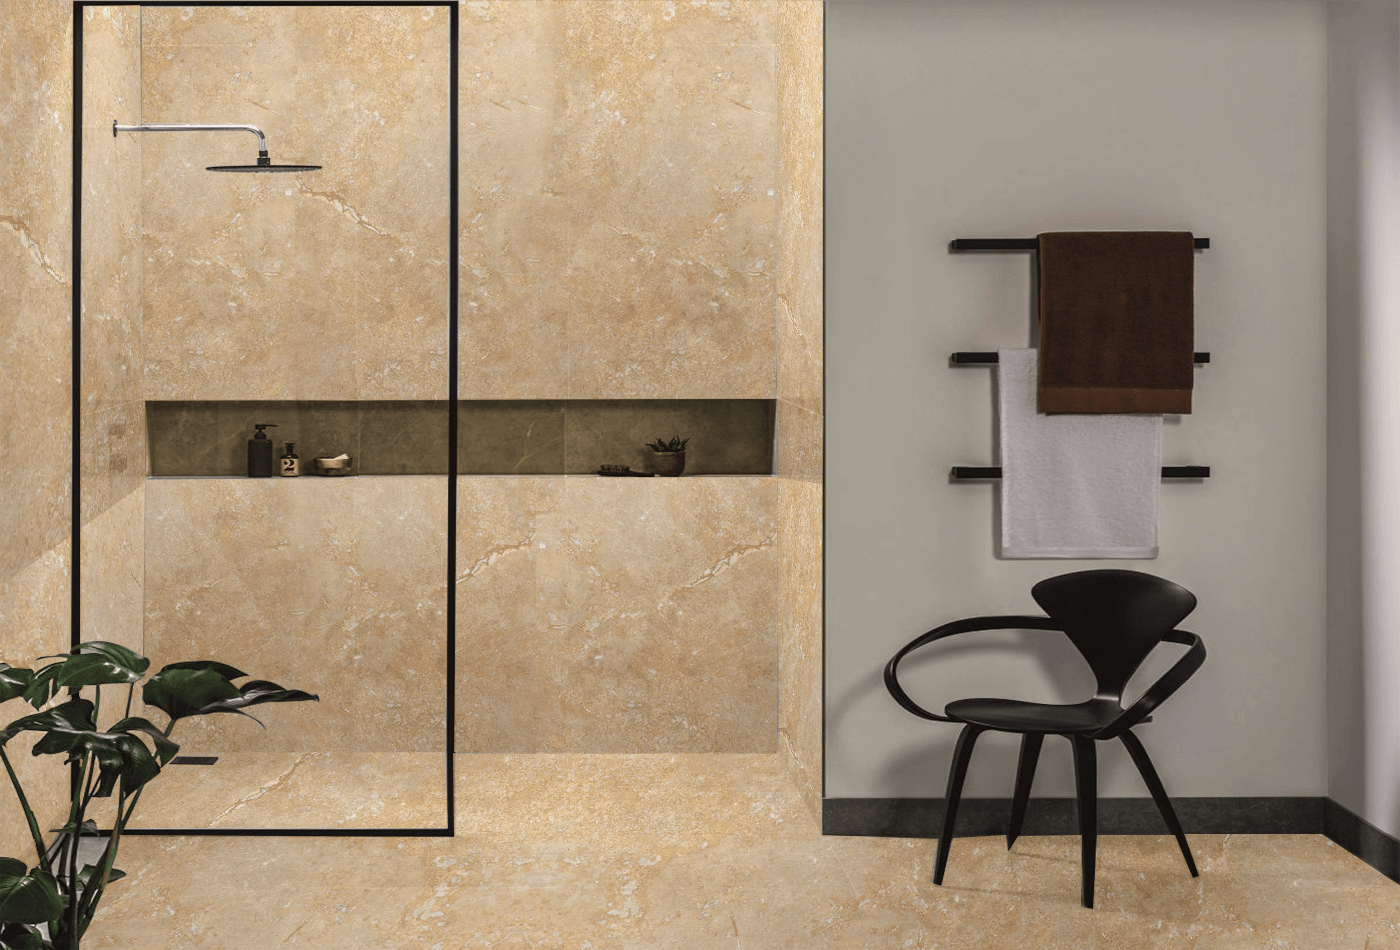 Golden Sienna has Amazing Features for Your Kitchen & Bathroom Tiles! Check it out Here